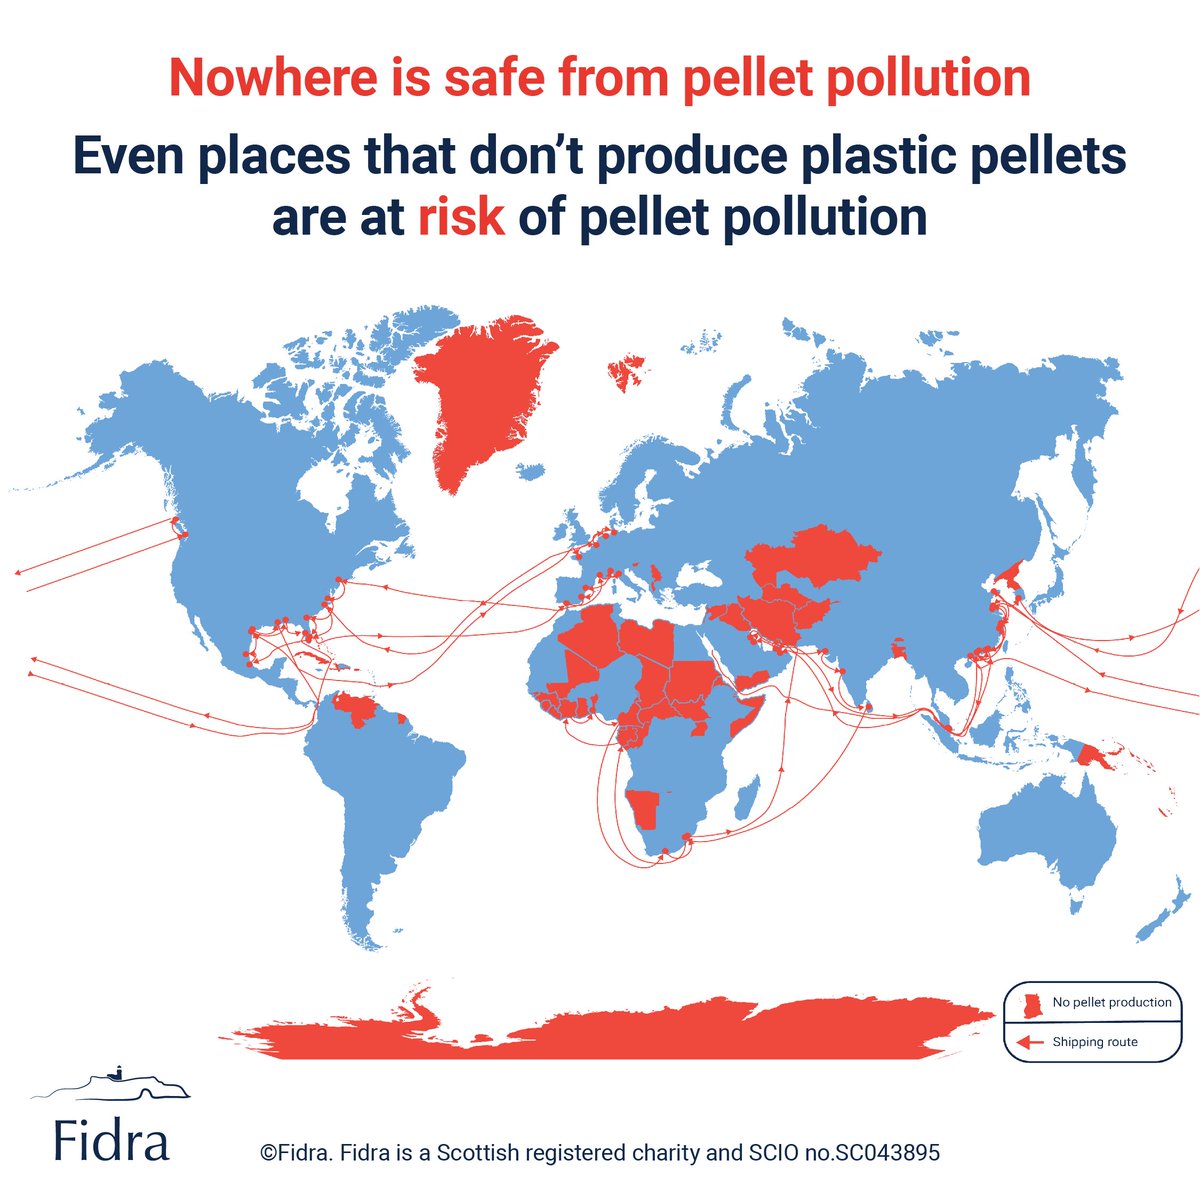 Plastic pellet pollution is a global issue🌍 Pellets spill into the environment all along the global plastic pellet supply chains. Even nations that don't produce pellets are at risk of pellet pollution Global action is vital to address this global issue! #PlasticsTreaty #INC4